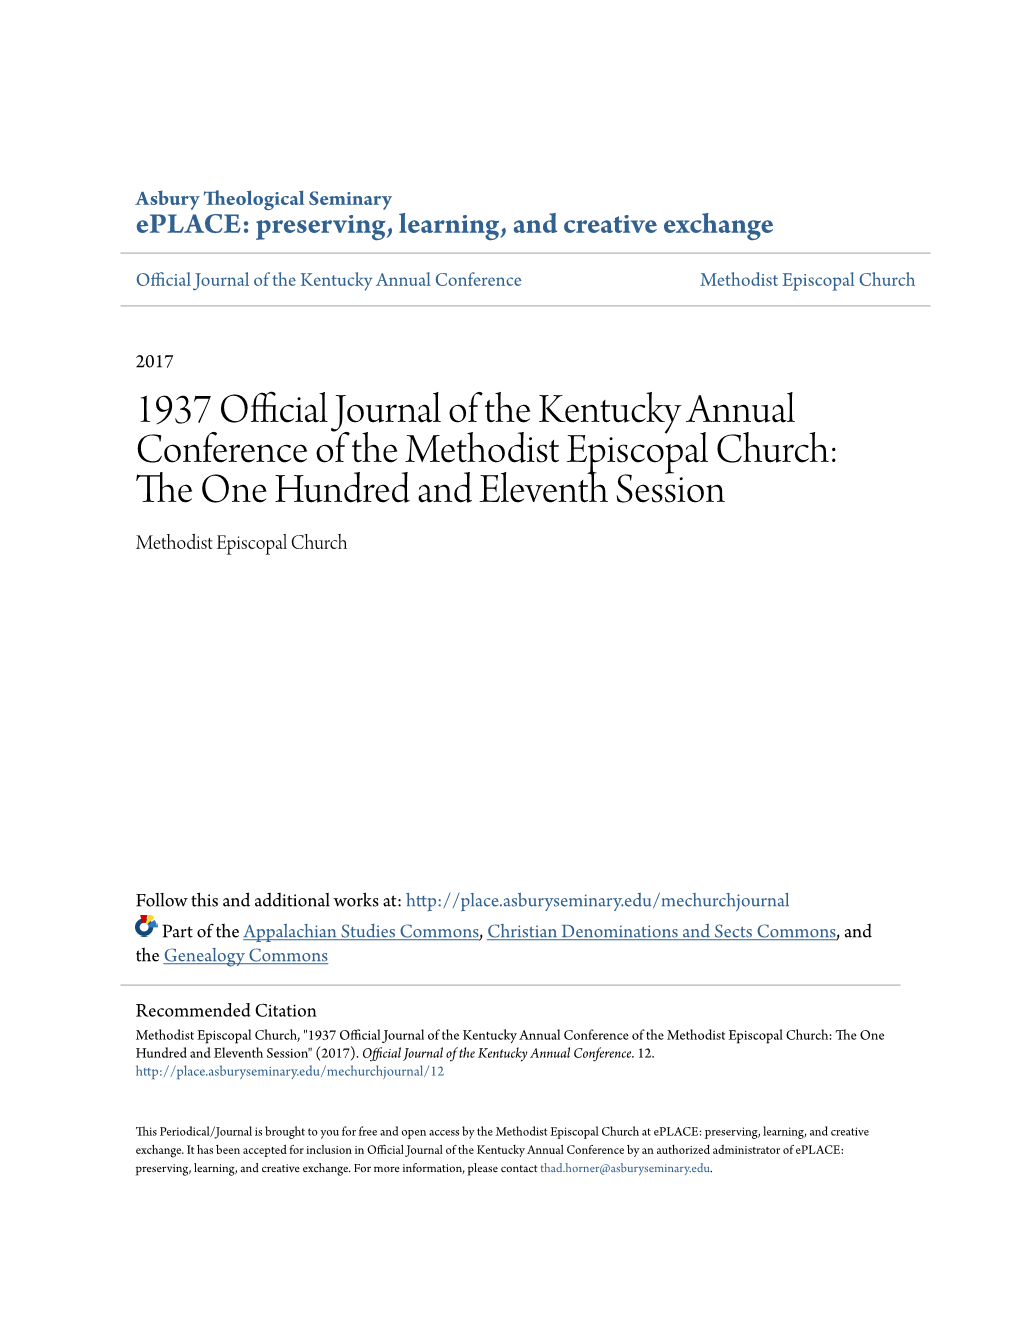 1937 Official Journal of the Kentucky Annual Conference of the Methodist Episcopal Church: the One Hundred and Eleventh Session Methodist Episcopal Church